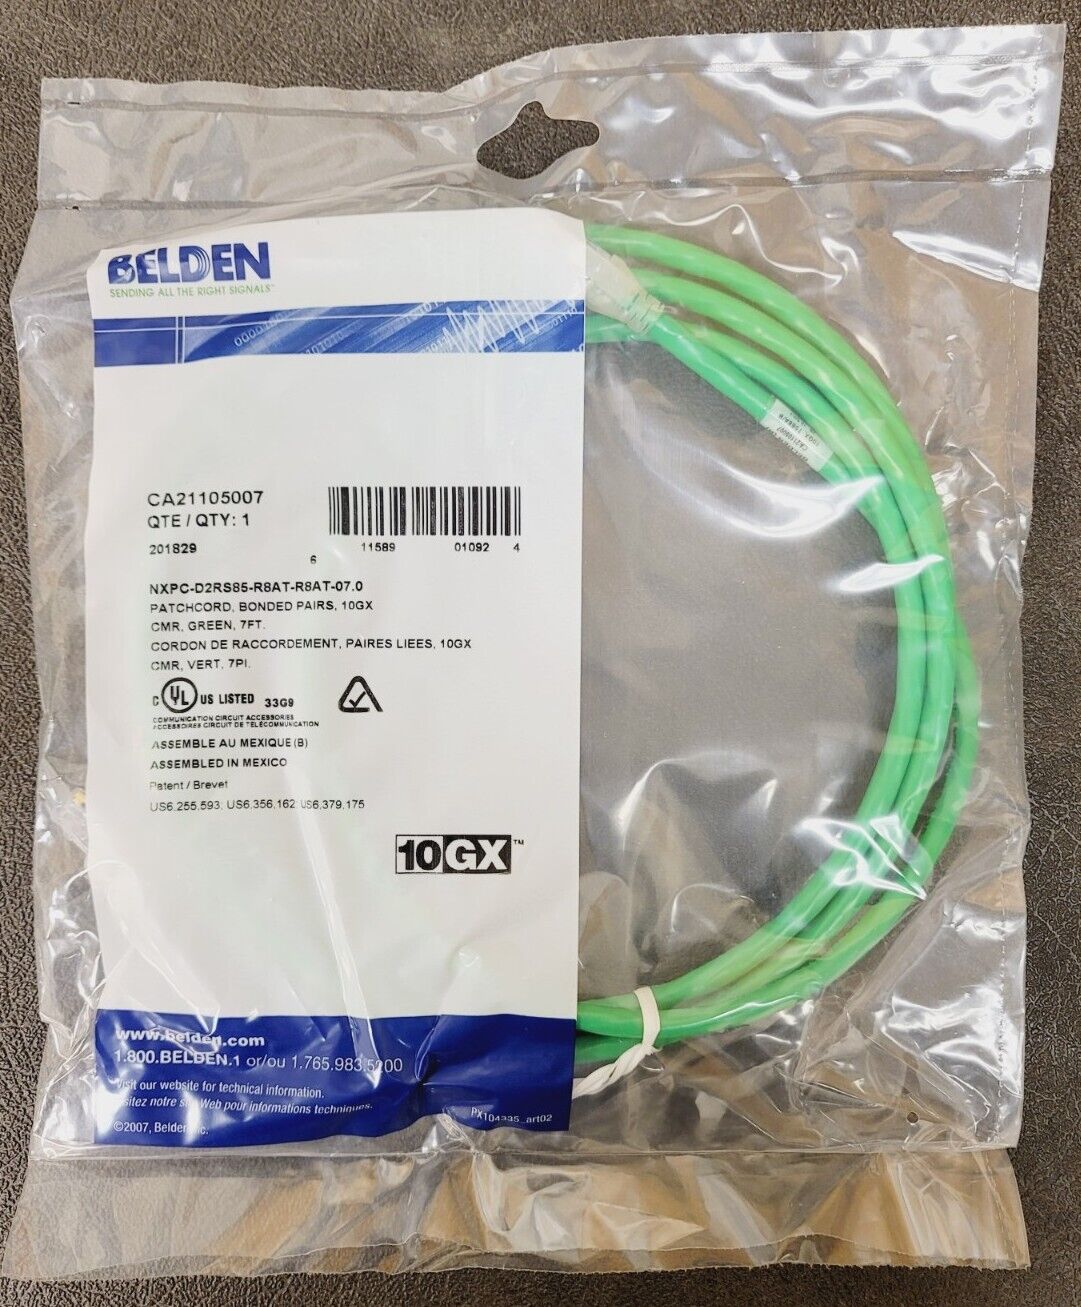 Belden Cat6A 7 FT Patch cord 24AWG 625Bonded Pair 10GX Green - RJ45 CA21105007